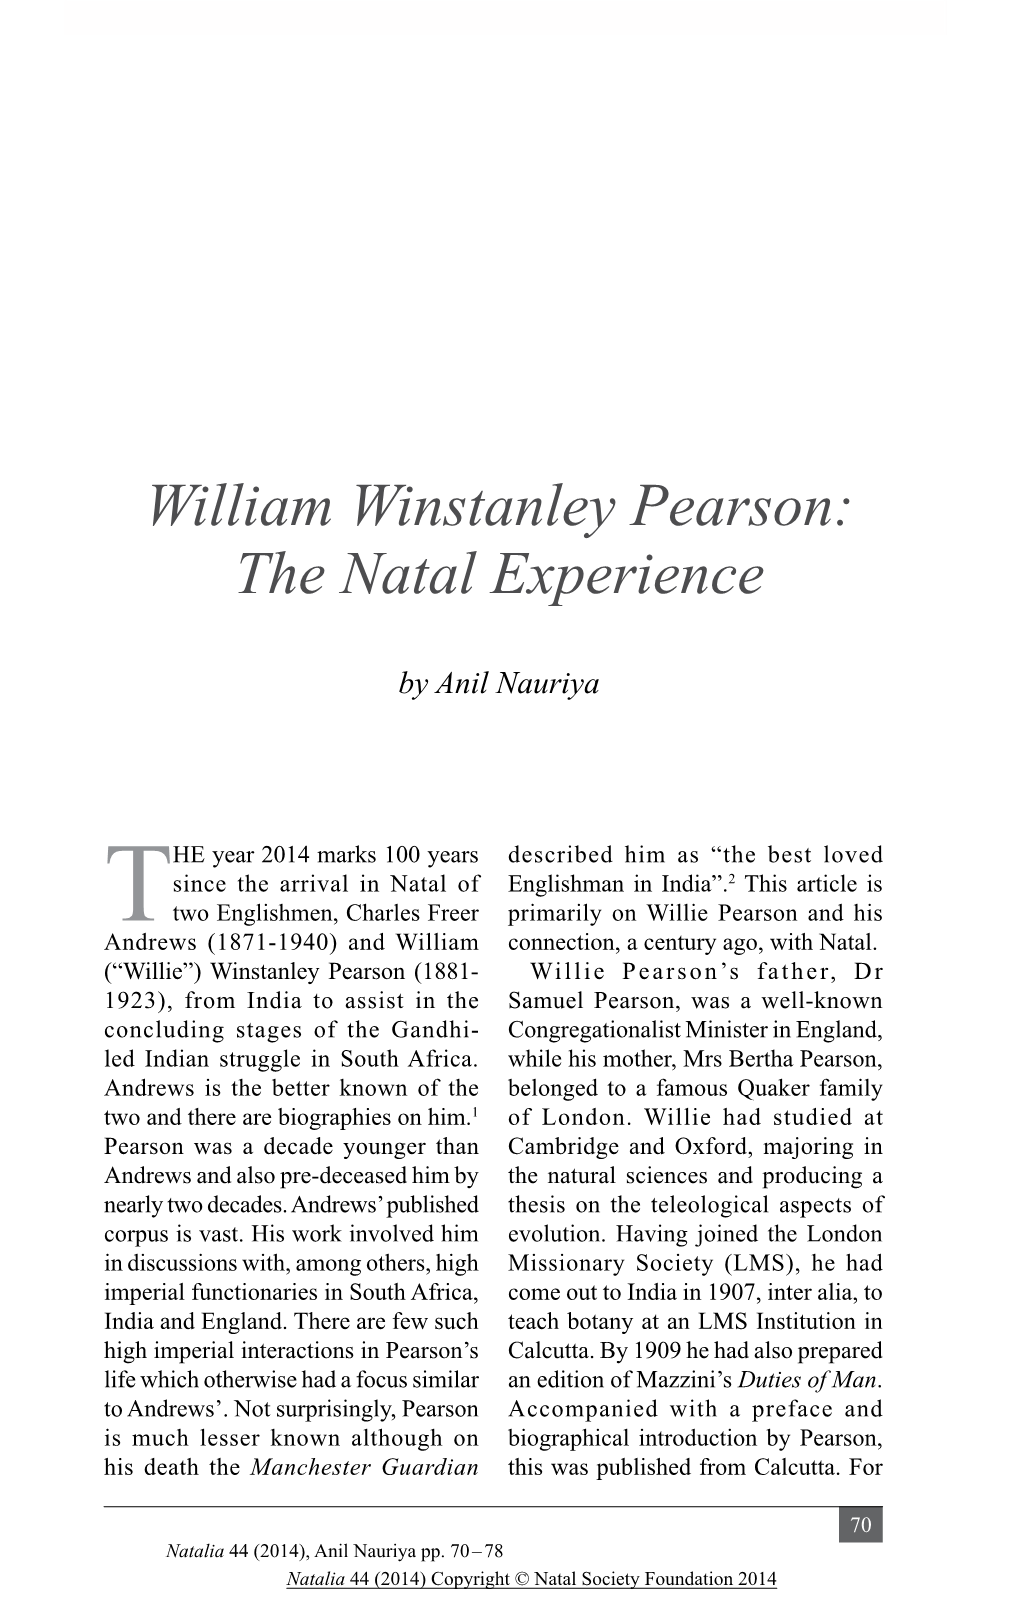 William Winstanley Pearson: the Natal Experience